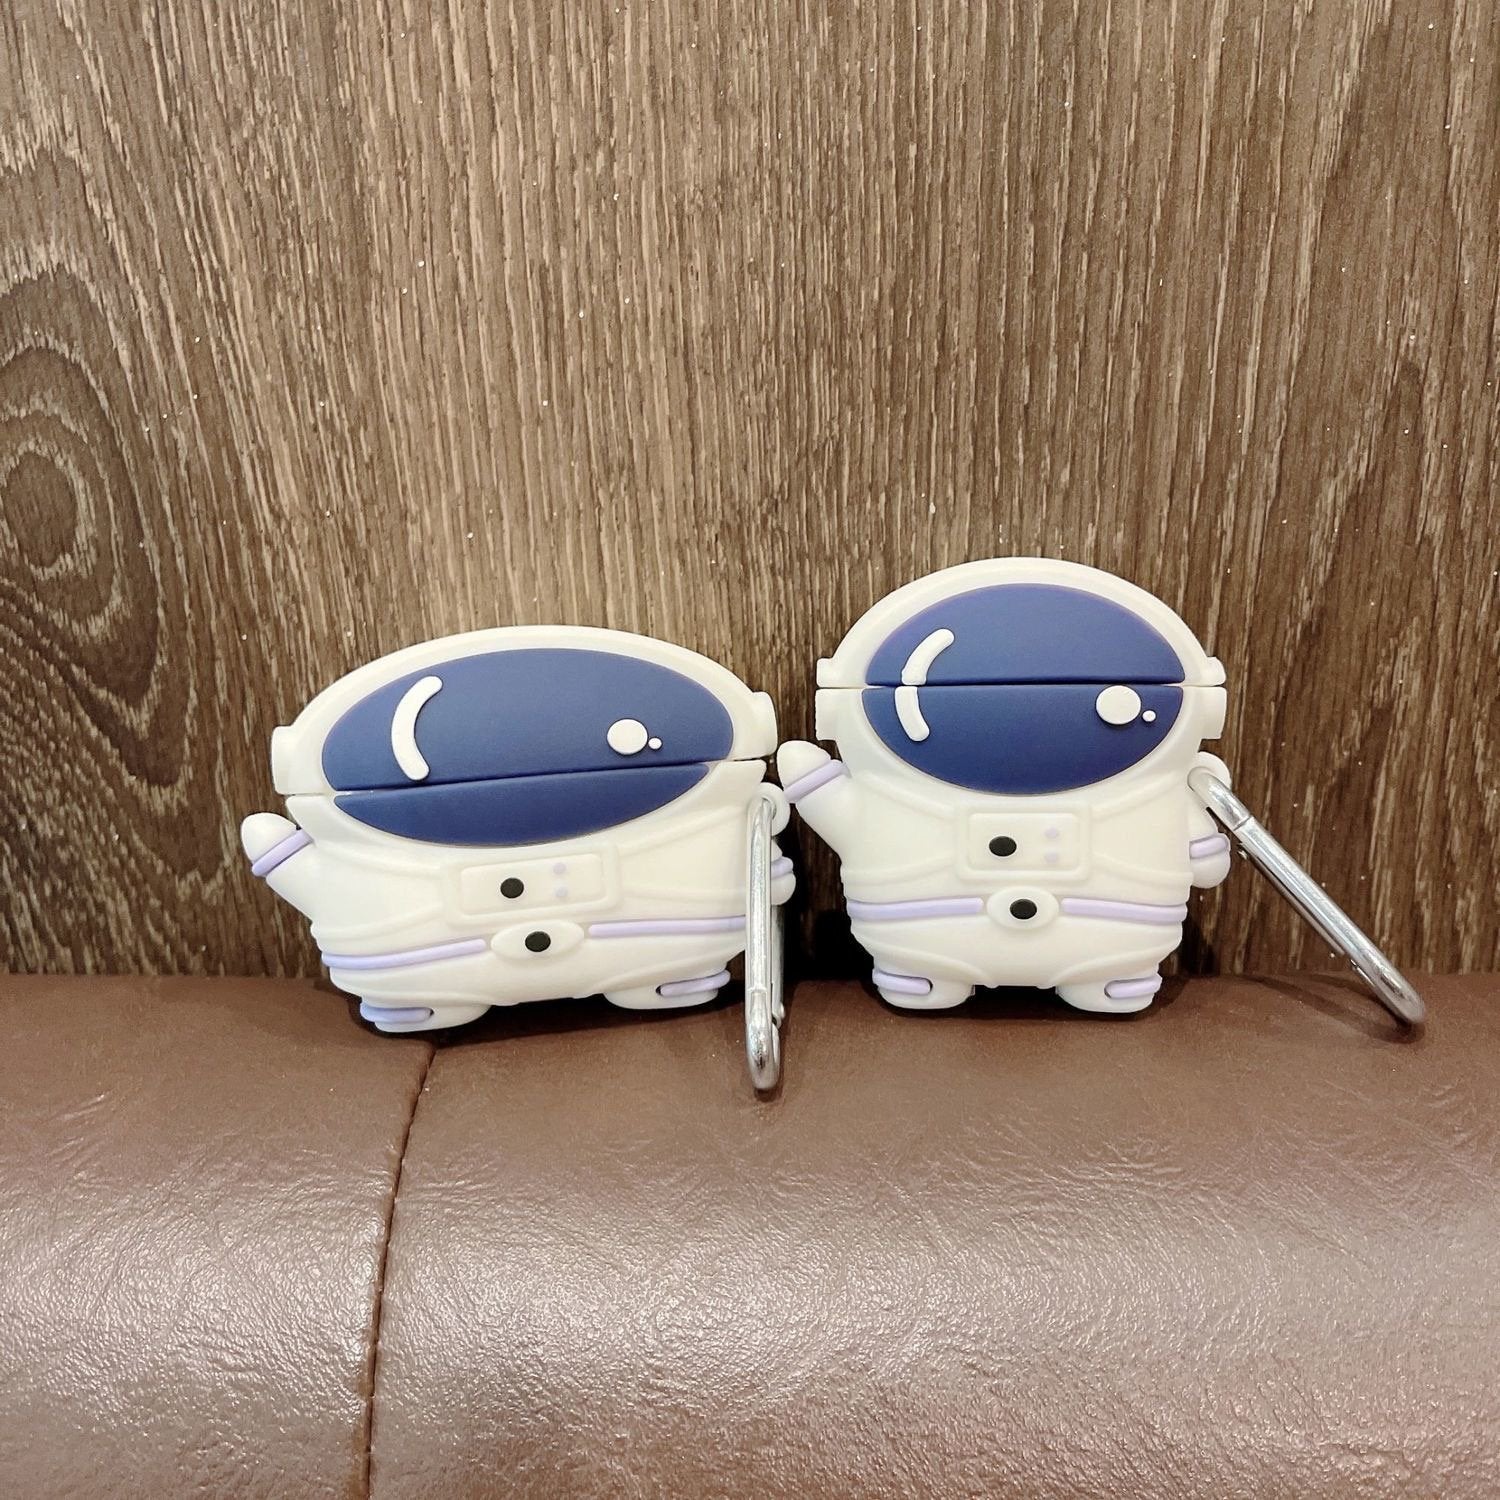 The astronauts/Airpods